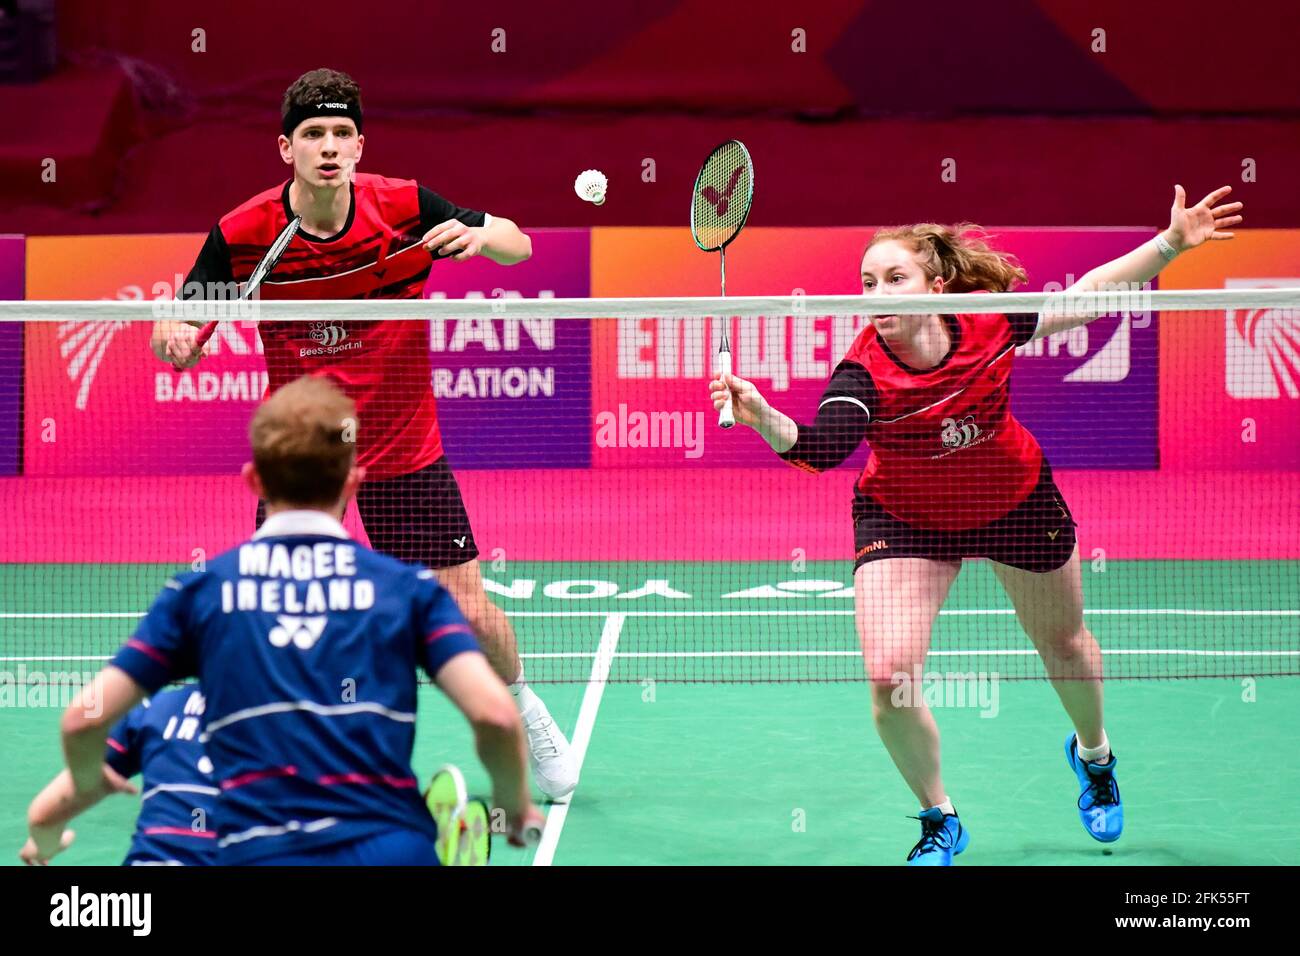 KYIV, UKRAINE - APRIL 28: Debora Jille of The Netherlands competes in her  Mixed Doubles match with Ties van der Lecq of The Netherlands against Sam  Magee of Ireland and Chloe Magee